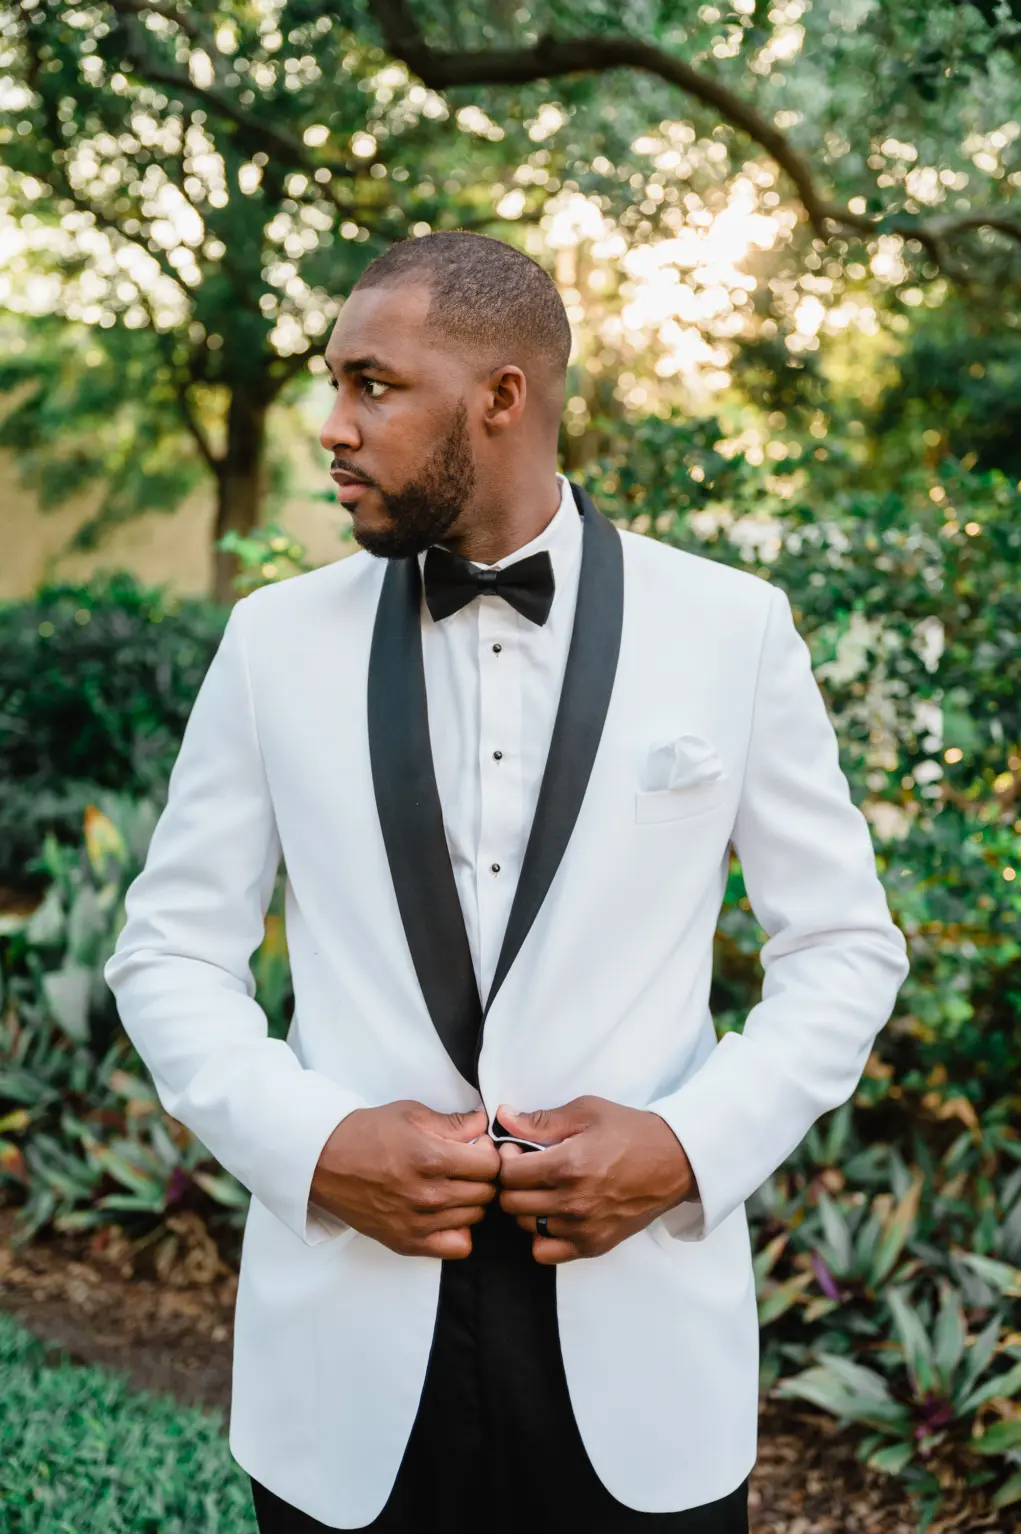 Groom's Black and White Wedding Tuxedo and Bowtie Inspiration